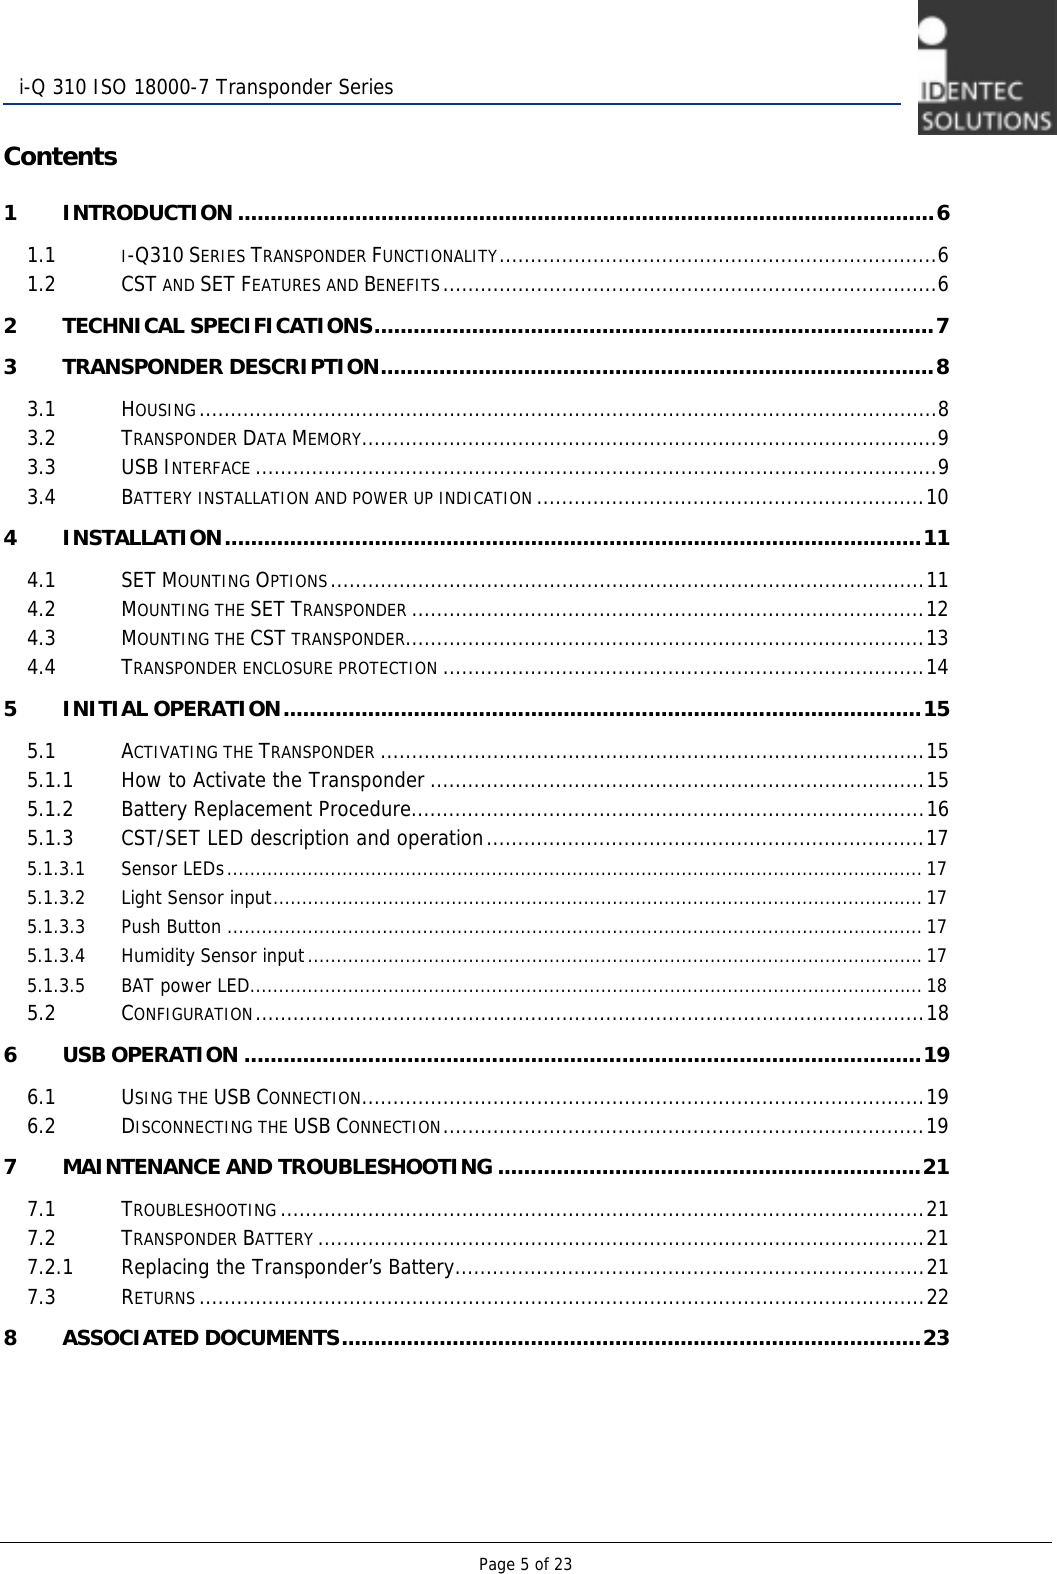   Page 5 of 23  i-Q 310 ISO 18000-7 Transponder Series Contents 1 INTRODUCTION ...........................................................................................................6 1.1 I-Q310 SERIES TRANSPONDER FUNCTIONALITY......................................................................6 1.2 CST AND SET FEATURES AND BENEFITS...............................................................................6 2 TECHNICAL SPECIFICATIONS......................................................................................7 3 TRANSPONDER DESCRIPTION.....................................................................................8 3.1 HOUSING......................................................................................................................8 3.2 TRANSPONDER DATA MEMORY............................................................................................9 3.3 USB INTERFACE .............................................................................................................9 3.4 BATTERY INSTALLATION AND POWER UP INDICATION ..............................................................10 4 INSTALLATION...........................................................................................................11 4.1 SET MOUNTING OPTIONS...............................................................................................11 4.2 MOUNTING THE SET TRANSPONDER ..................................................................................12 4.3 MOUNTING THE CST TRANSPONDER...................................................................................13 4.4 TRANSPONDER ENCLOSURE PROTECTION .............................................................................14 5 INITIAL OPERATION..................................................................................................15 5.1 ACTIVATING THE TRANSPONDER .......................................................................................15 5.1.1 How to Activate the Transponder ...............................................................................15 5.1.2 Battery Replacement Procedure..................................................................................16 5.1.3 CST/SET LED description and operation......................................................................17 5.1.3.1 Sensor LEDs......................................................................................................................... 17 5.1.3.2 Light Sensor input................................................................................................................. 17 5.1.3.3 Push Button ......................................................................................................................... 17 5.1.3.4 Humidity Sensor input...........................................................................................................17 5.1.3.5 BAT power LED..................................................................................................................... 18 5.2 CONFIGURATION...........................................................................................................18 6 USB OPERATION ........................................................................................................19 6.1 USING THE USB CONNECTION..........................................................................................19 6.2 DISCONNECTING THE USB CONNECTION.............................................................................19 7 MAINTENANCE AND TROUBLESHOOTING .................................................................21 7.1 TROUBLESHOOTING .......................................................................................................21 7.2 TRANSPONDER BATTERY .................................................................................................21 7.2.1 Replacing the Transponder’s Battery...........................................................................21 7.3 RETURNS ....................................................................................................................22 8 ASSOCIATED DOCUMENTS.........................................................................................23       